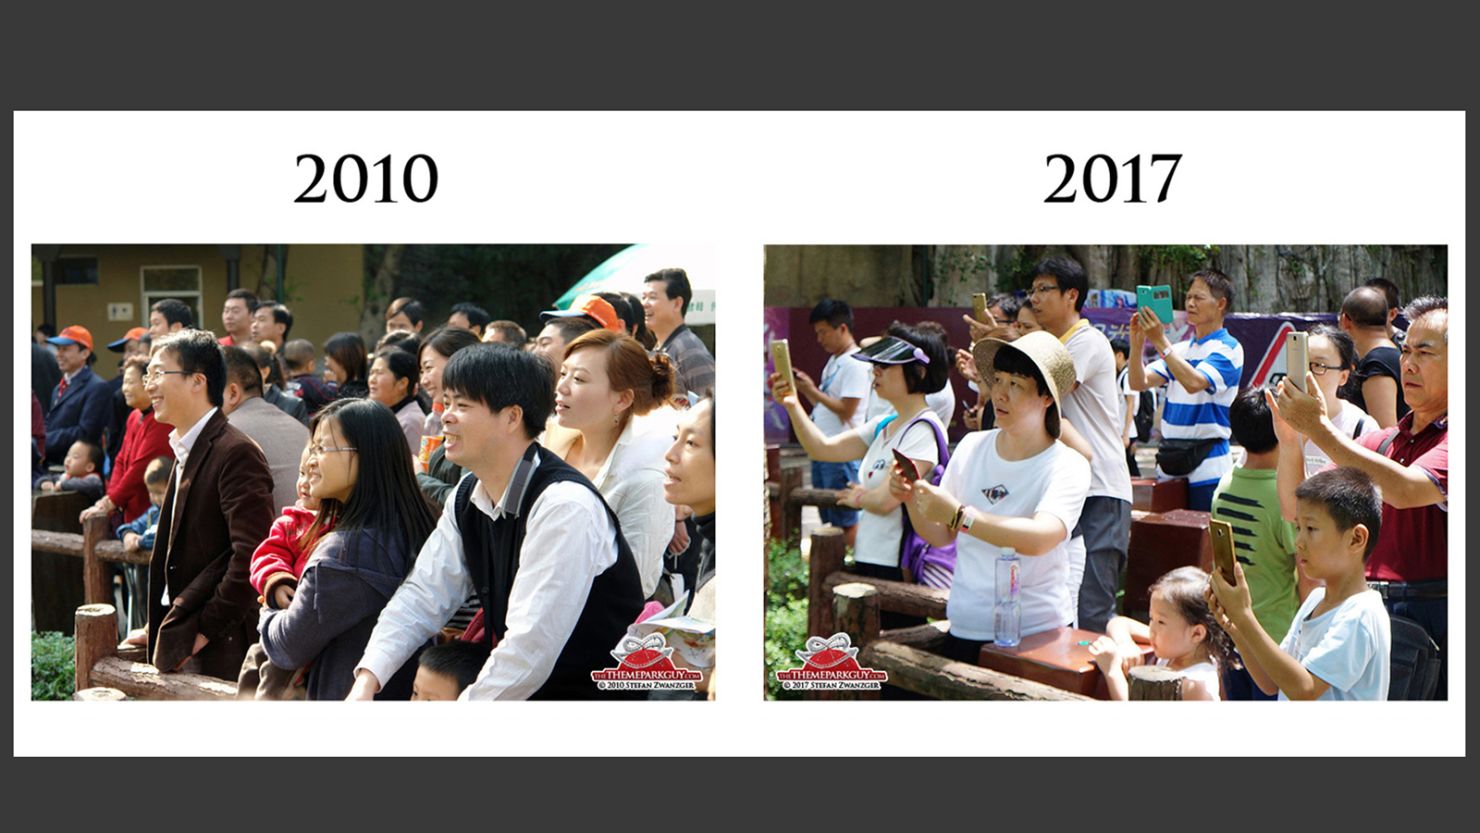 Theme parks before and after smartphone images